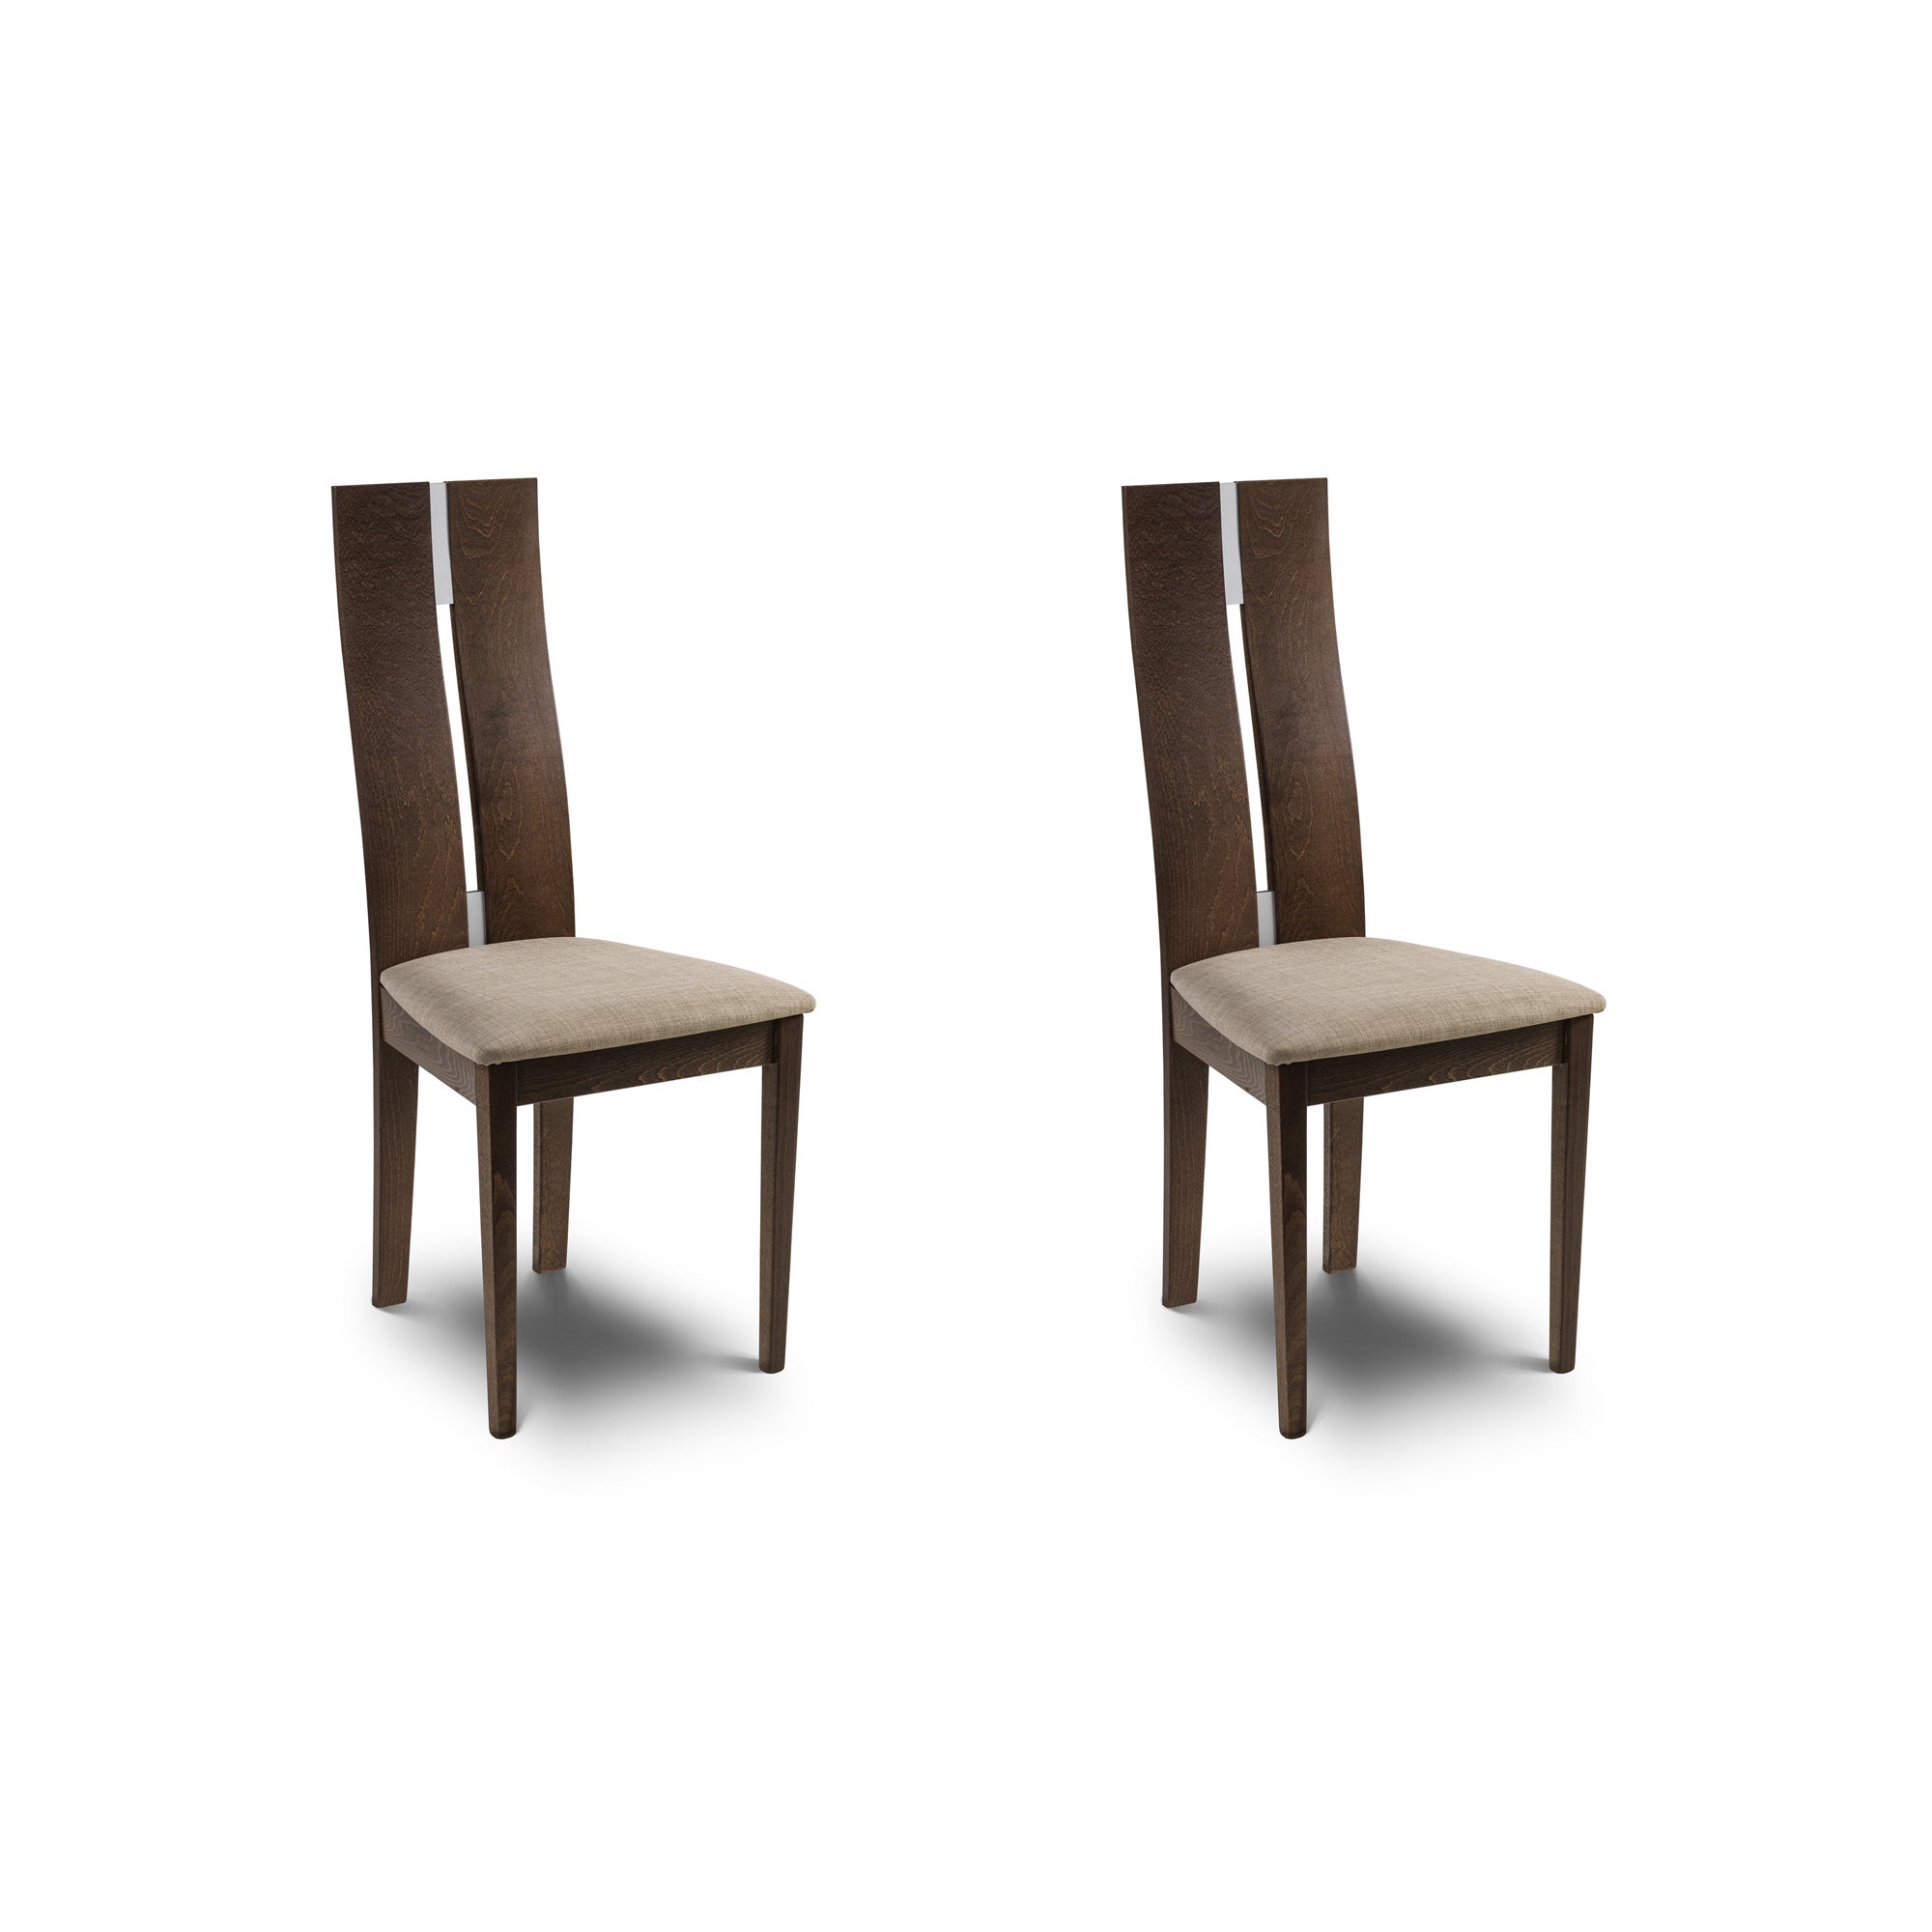 Cayman Set Of 2 Dining Chairs Walnut Faux Leather Wood Brown